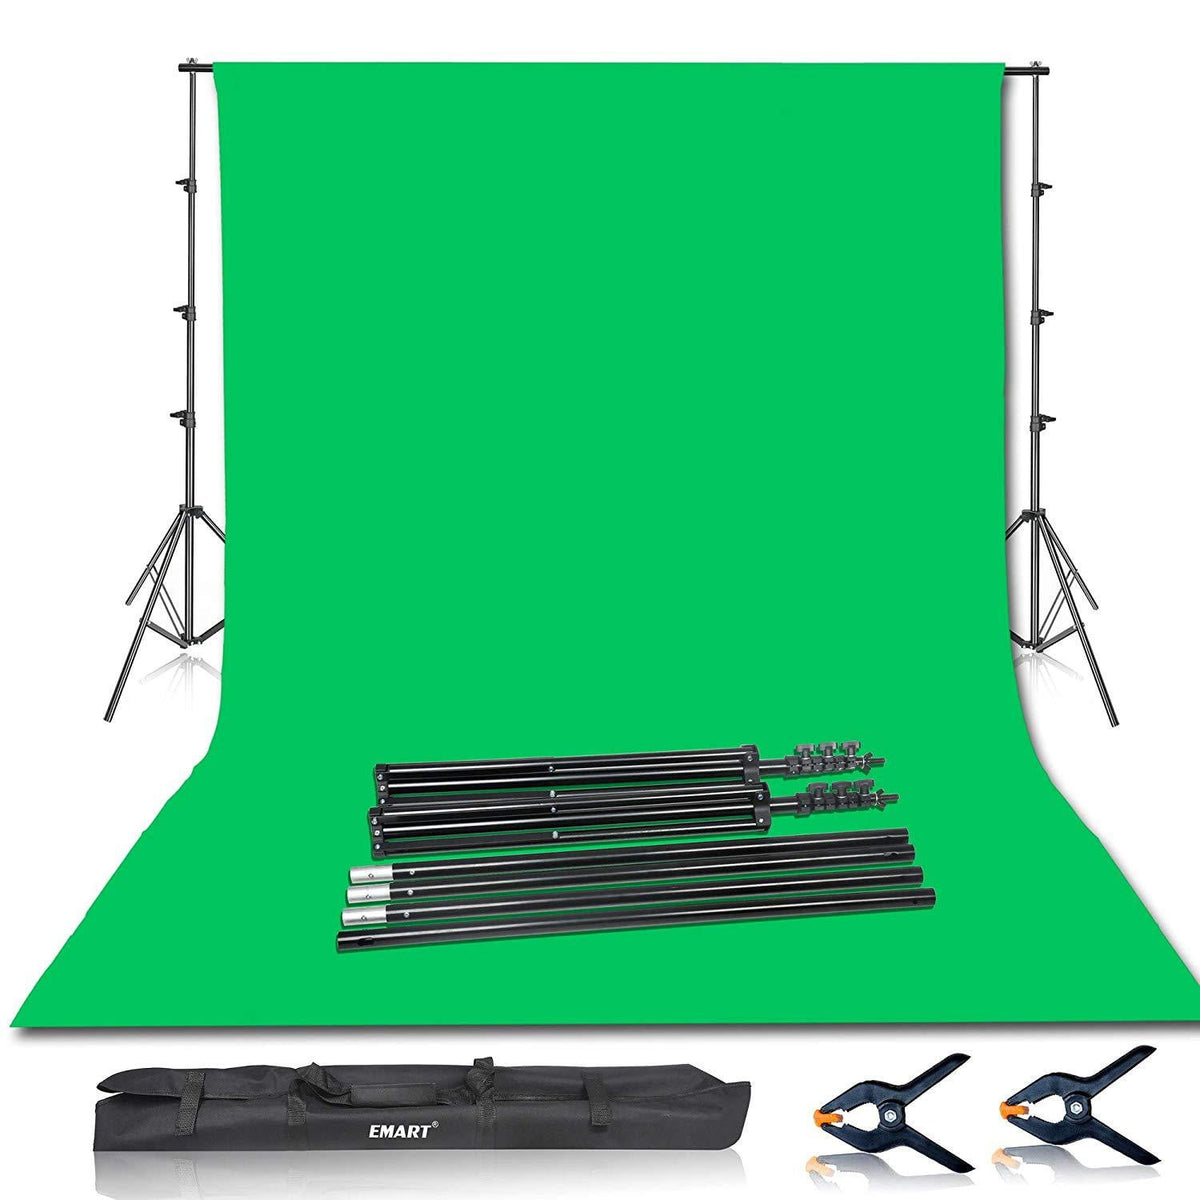 Emart Photo Backdrop Stand 7 x 10ft Green Screen Background Support Stand Kit with 6 x 9 100% Cotton Muslin Chromakey Backdrop for Photo Video Photography Studio Portrait 